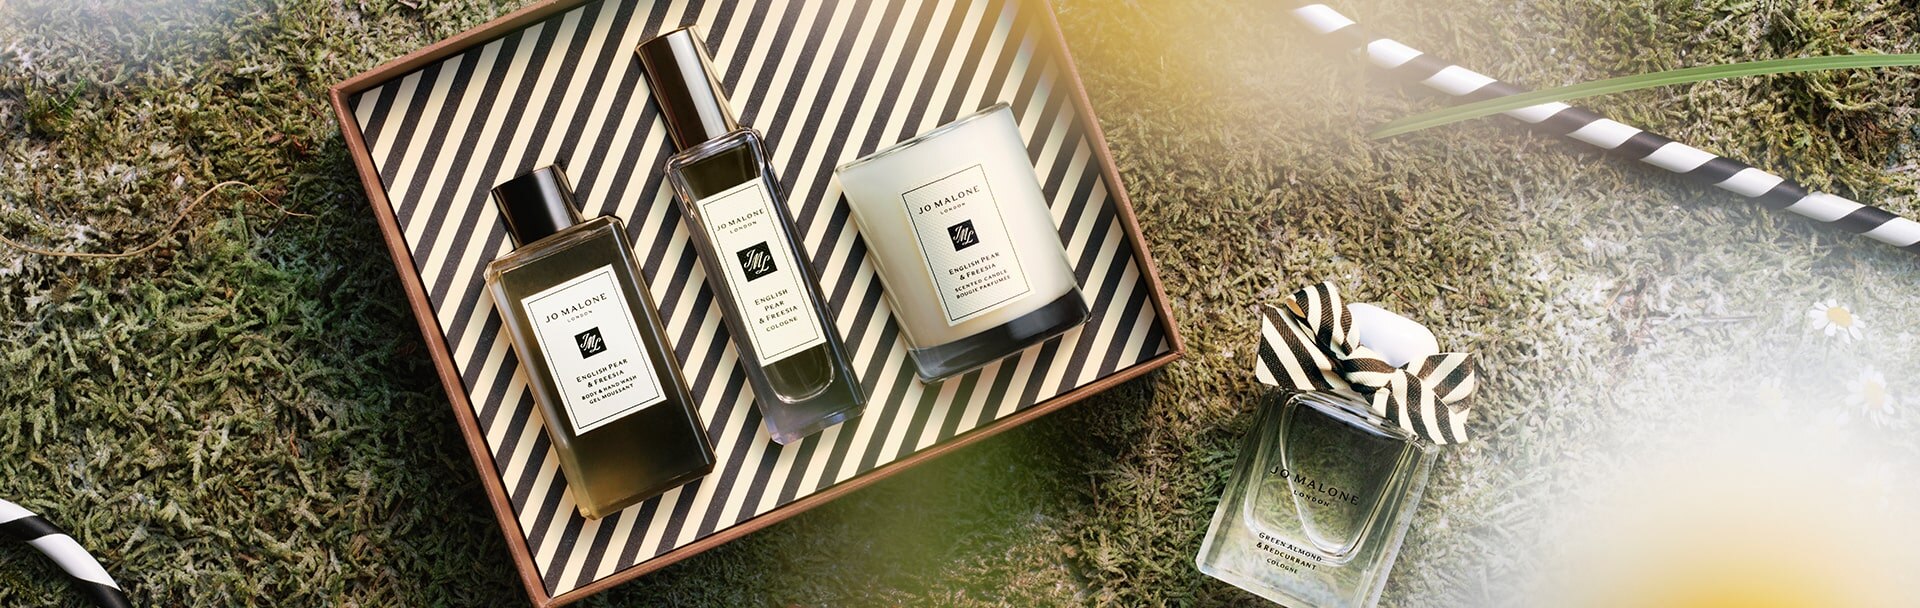 Jo Malone London Gift Set for her on a bed of moss with candle cologne and bath & body products and bows